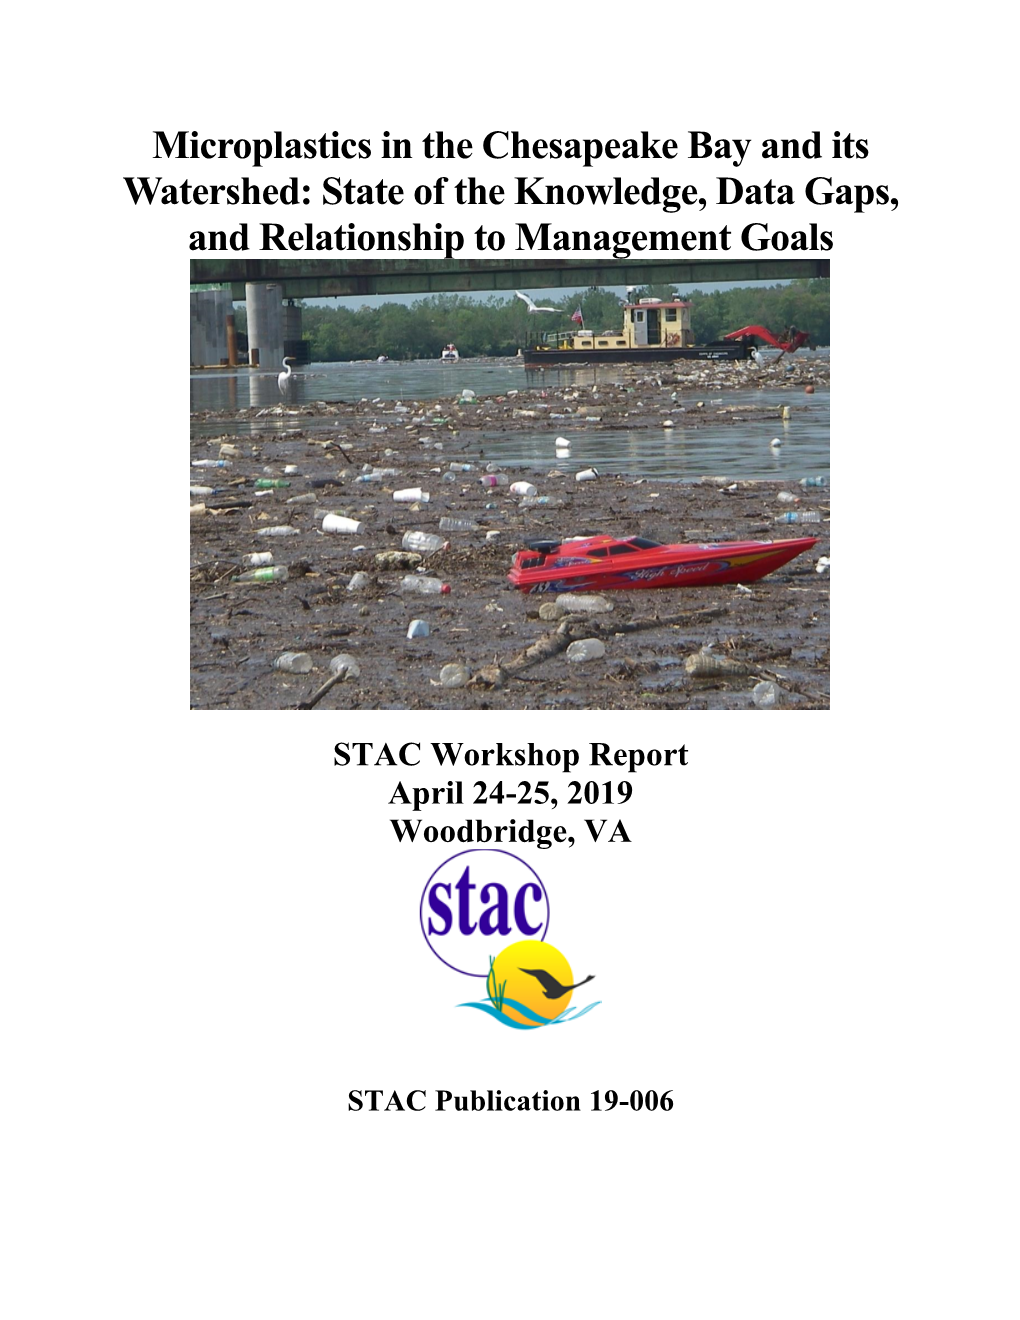 Microplastics in the Chesapeake Bay and Its Watershed: State of the Knowledge, Data Gaps, and Relationship to Management Goals